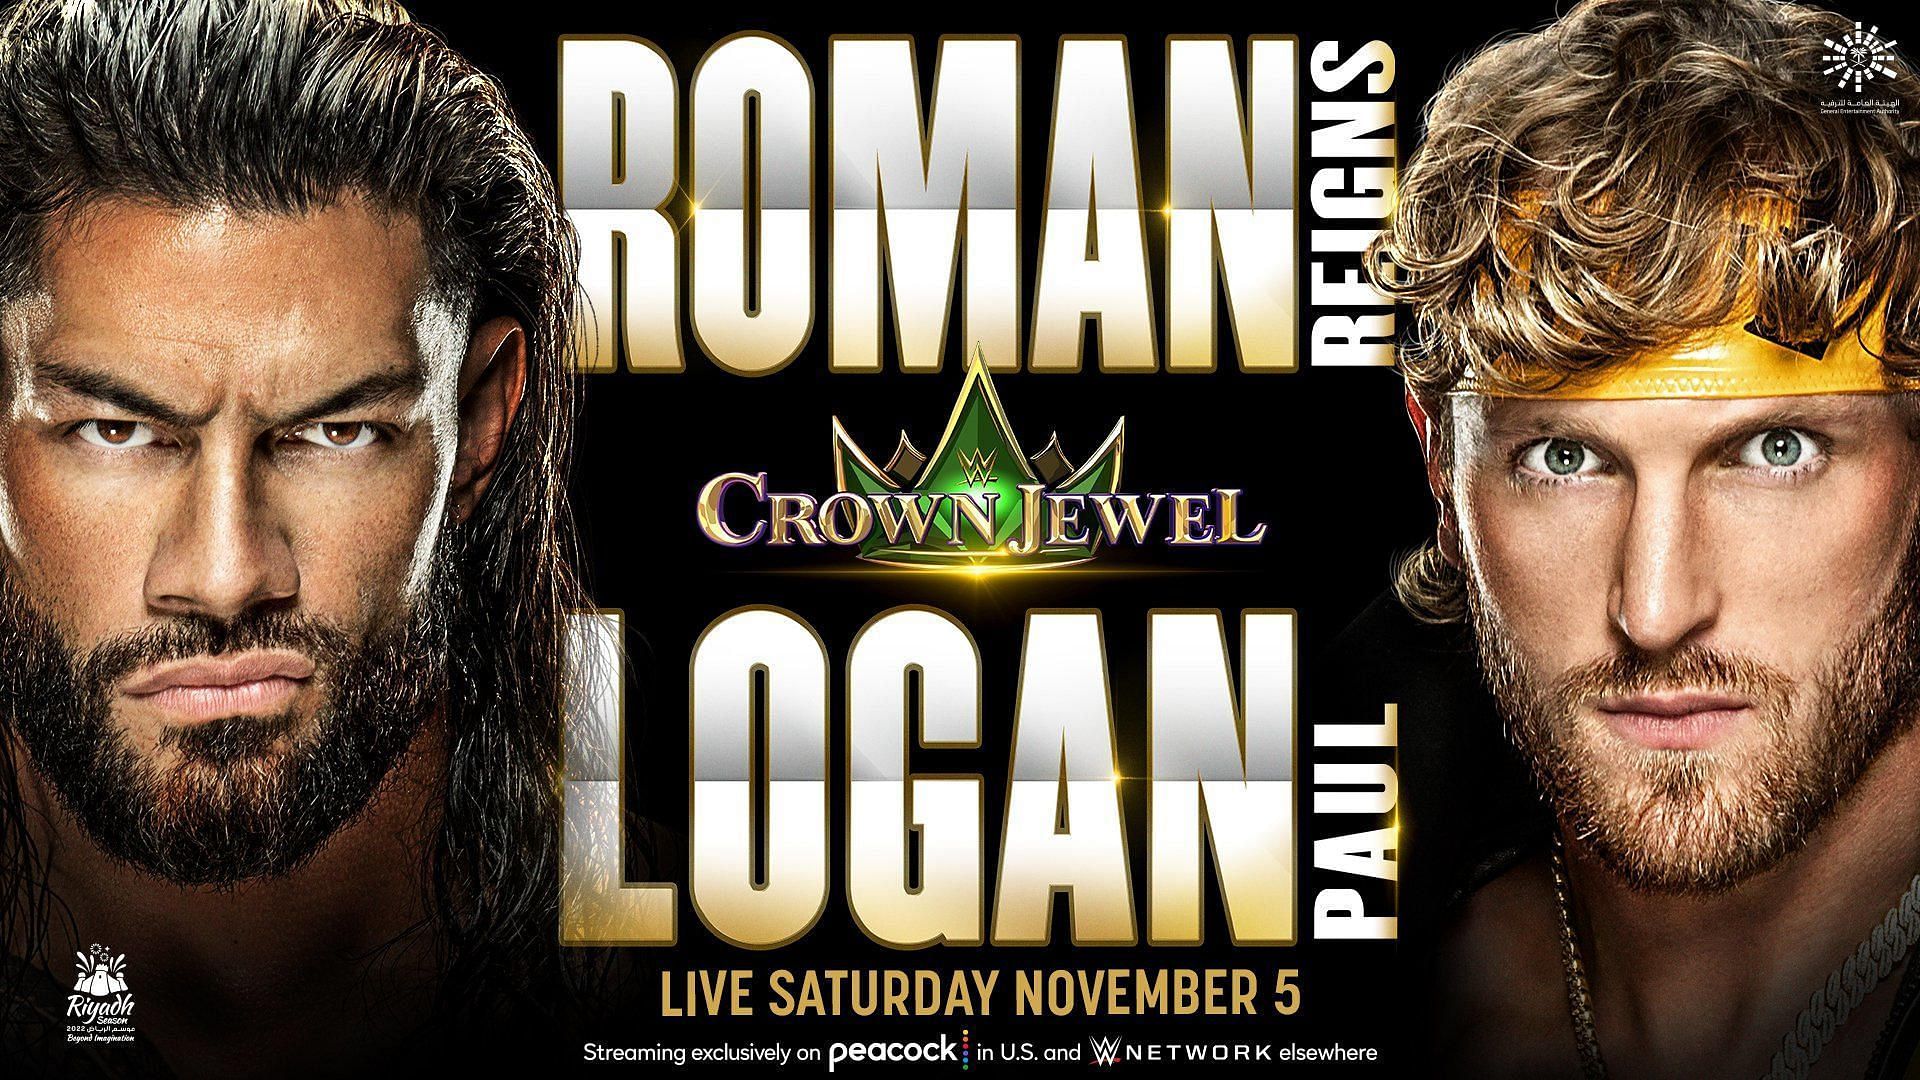 WWE Crown Jewel will be spectacular!